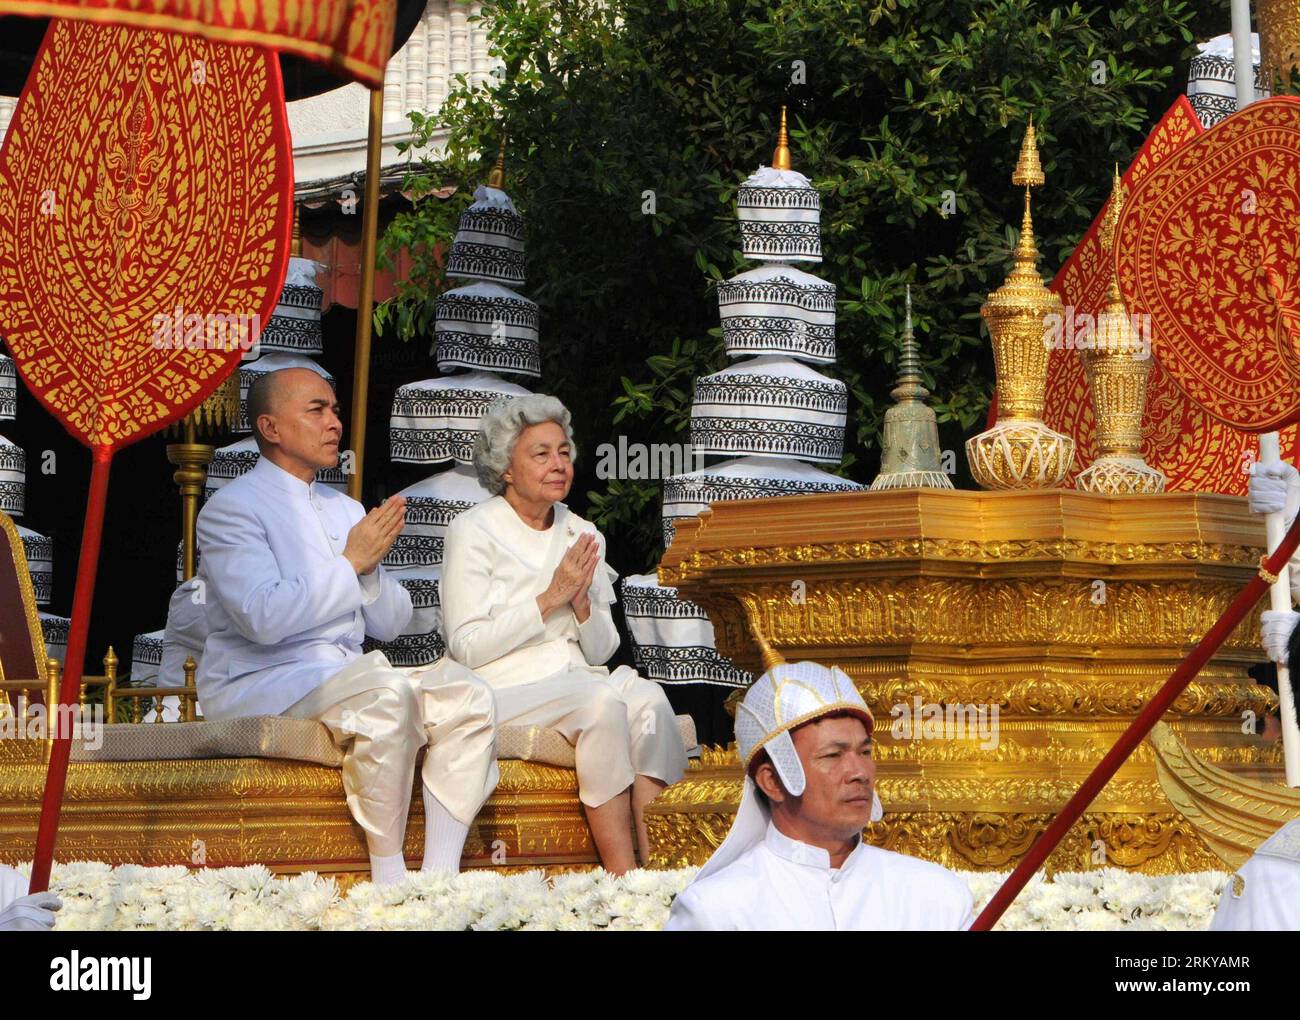 Bildnummer: 59188737  Datum: 07.02.2013  Copyright: imago/Xinhua PHNOM PENH, Feb. 7, 2013 -- Cambodian King Norodom Sihamoni (L) and his mother Queen Norodom Monineath escort the ashes of late King Father Norodom Sihanouk during a procession in Phnom Penh, Cambodia, Feb. 7, 2013. A week-long royal funeral of Cambodia s late King Norodom Sihanouk came to an end on Thursday when part of his cremains were taken from the cremation site to keep in the royal palace in a procession. (Xinhua/Zhao Yishen) (zy) CAMBODIA-KING-FATHER-FUNERAL-END PUBLICATIONxNOTxINxCHN Gesellschaft Politk Adel People Begrä Stock Photo